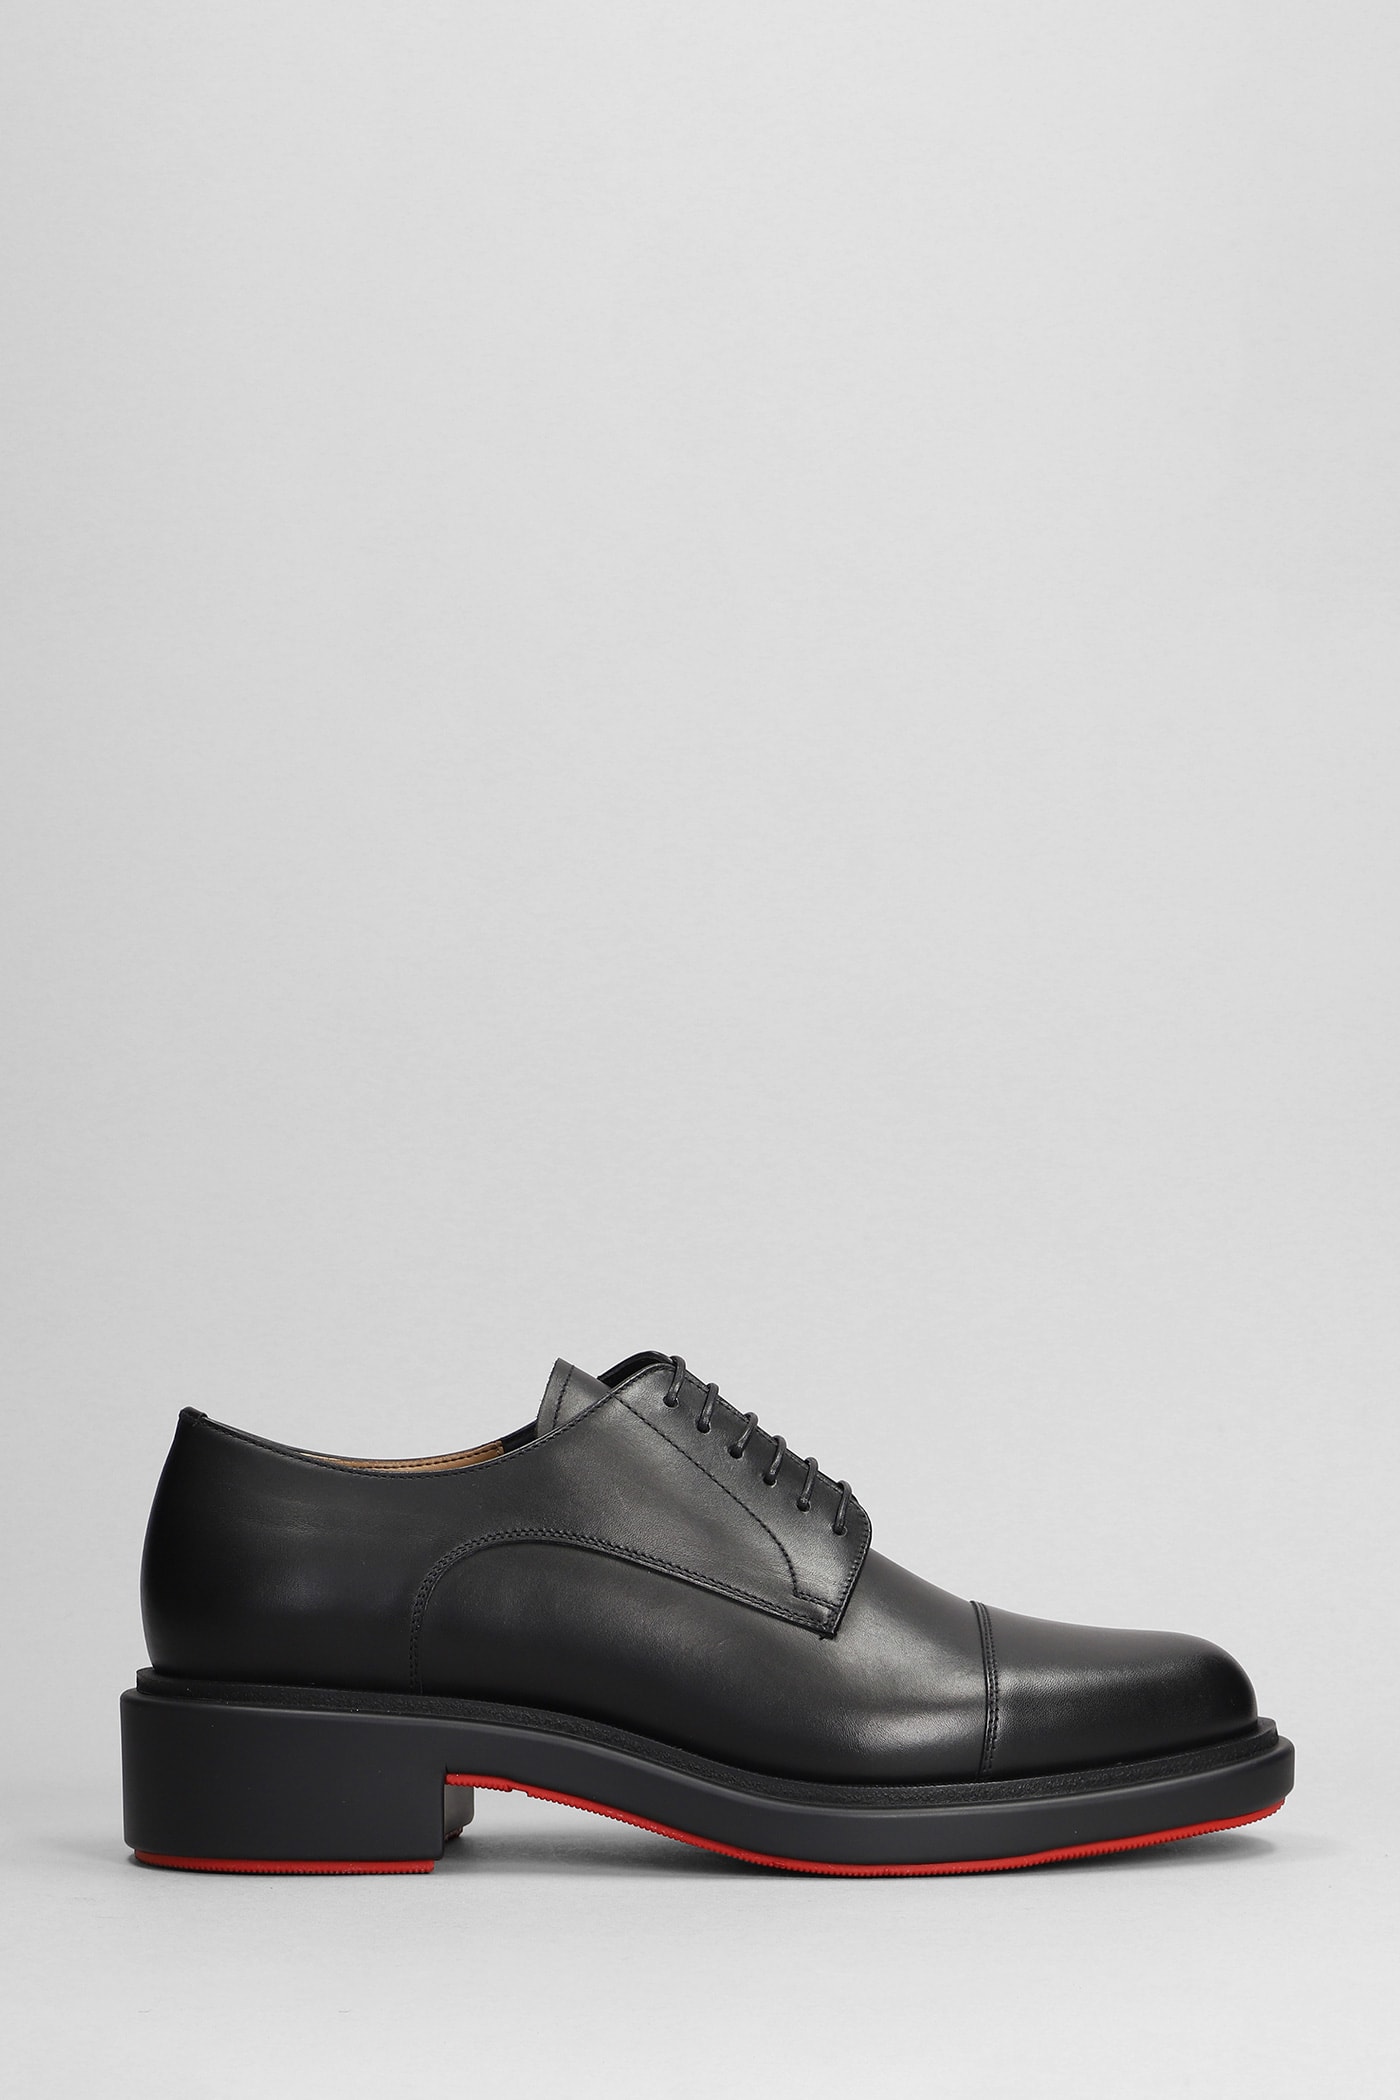 urbino Lace Up Shoes